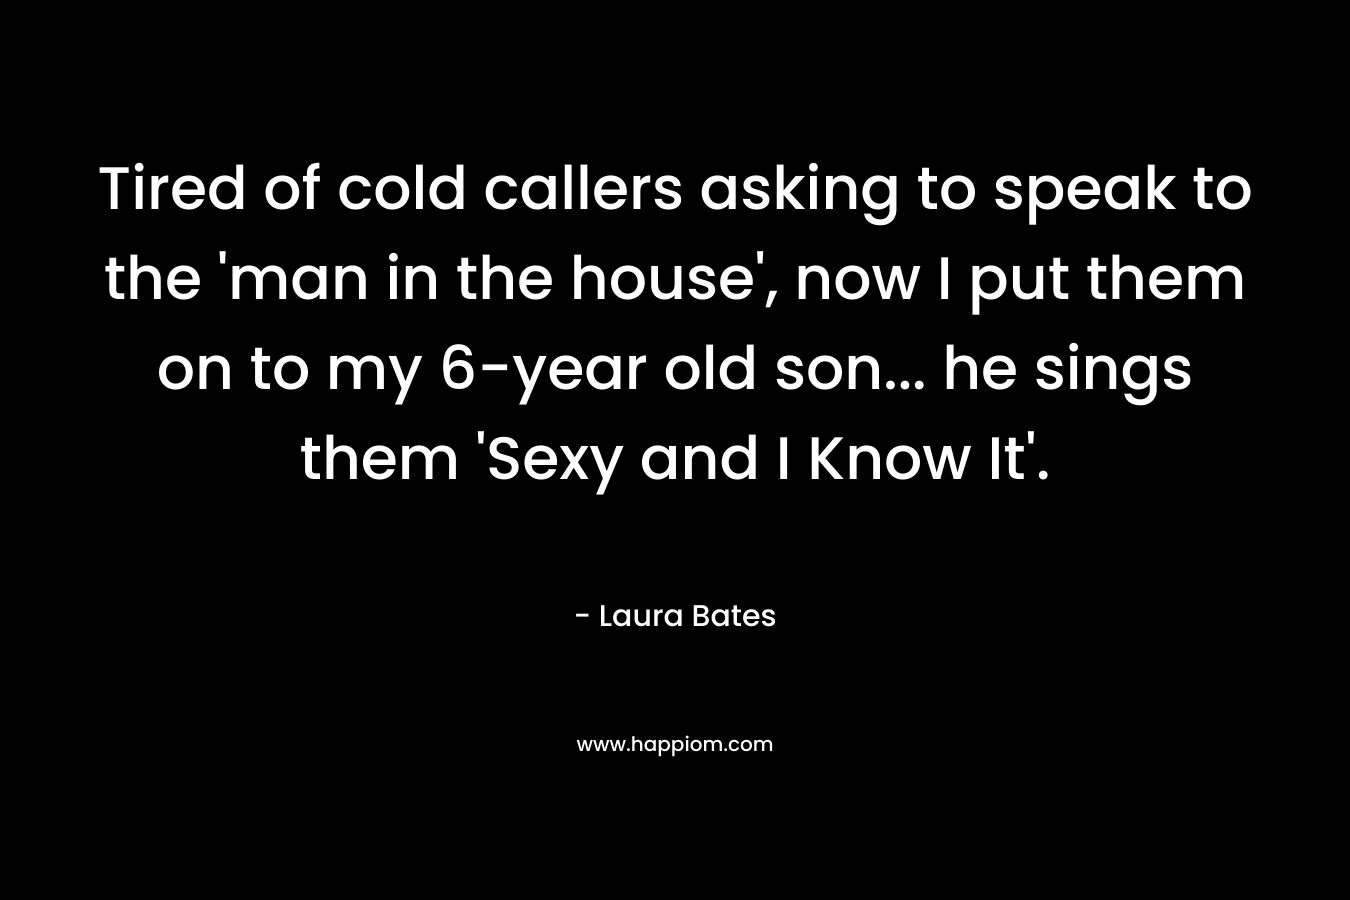 Tired of cold callers asking to speak to the ‘man in the house’, now I put them on to my 6-year old son… he sings them ‘Sexy and I Know It’. – Laura Bates